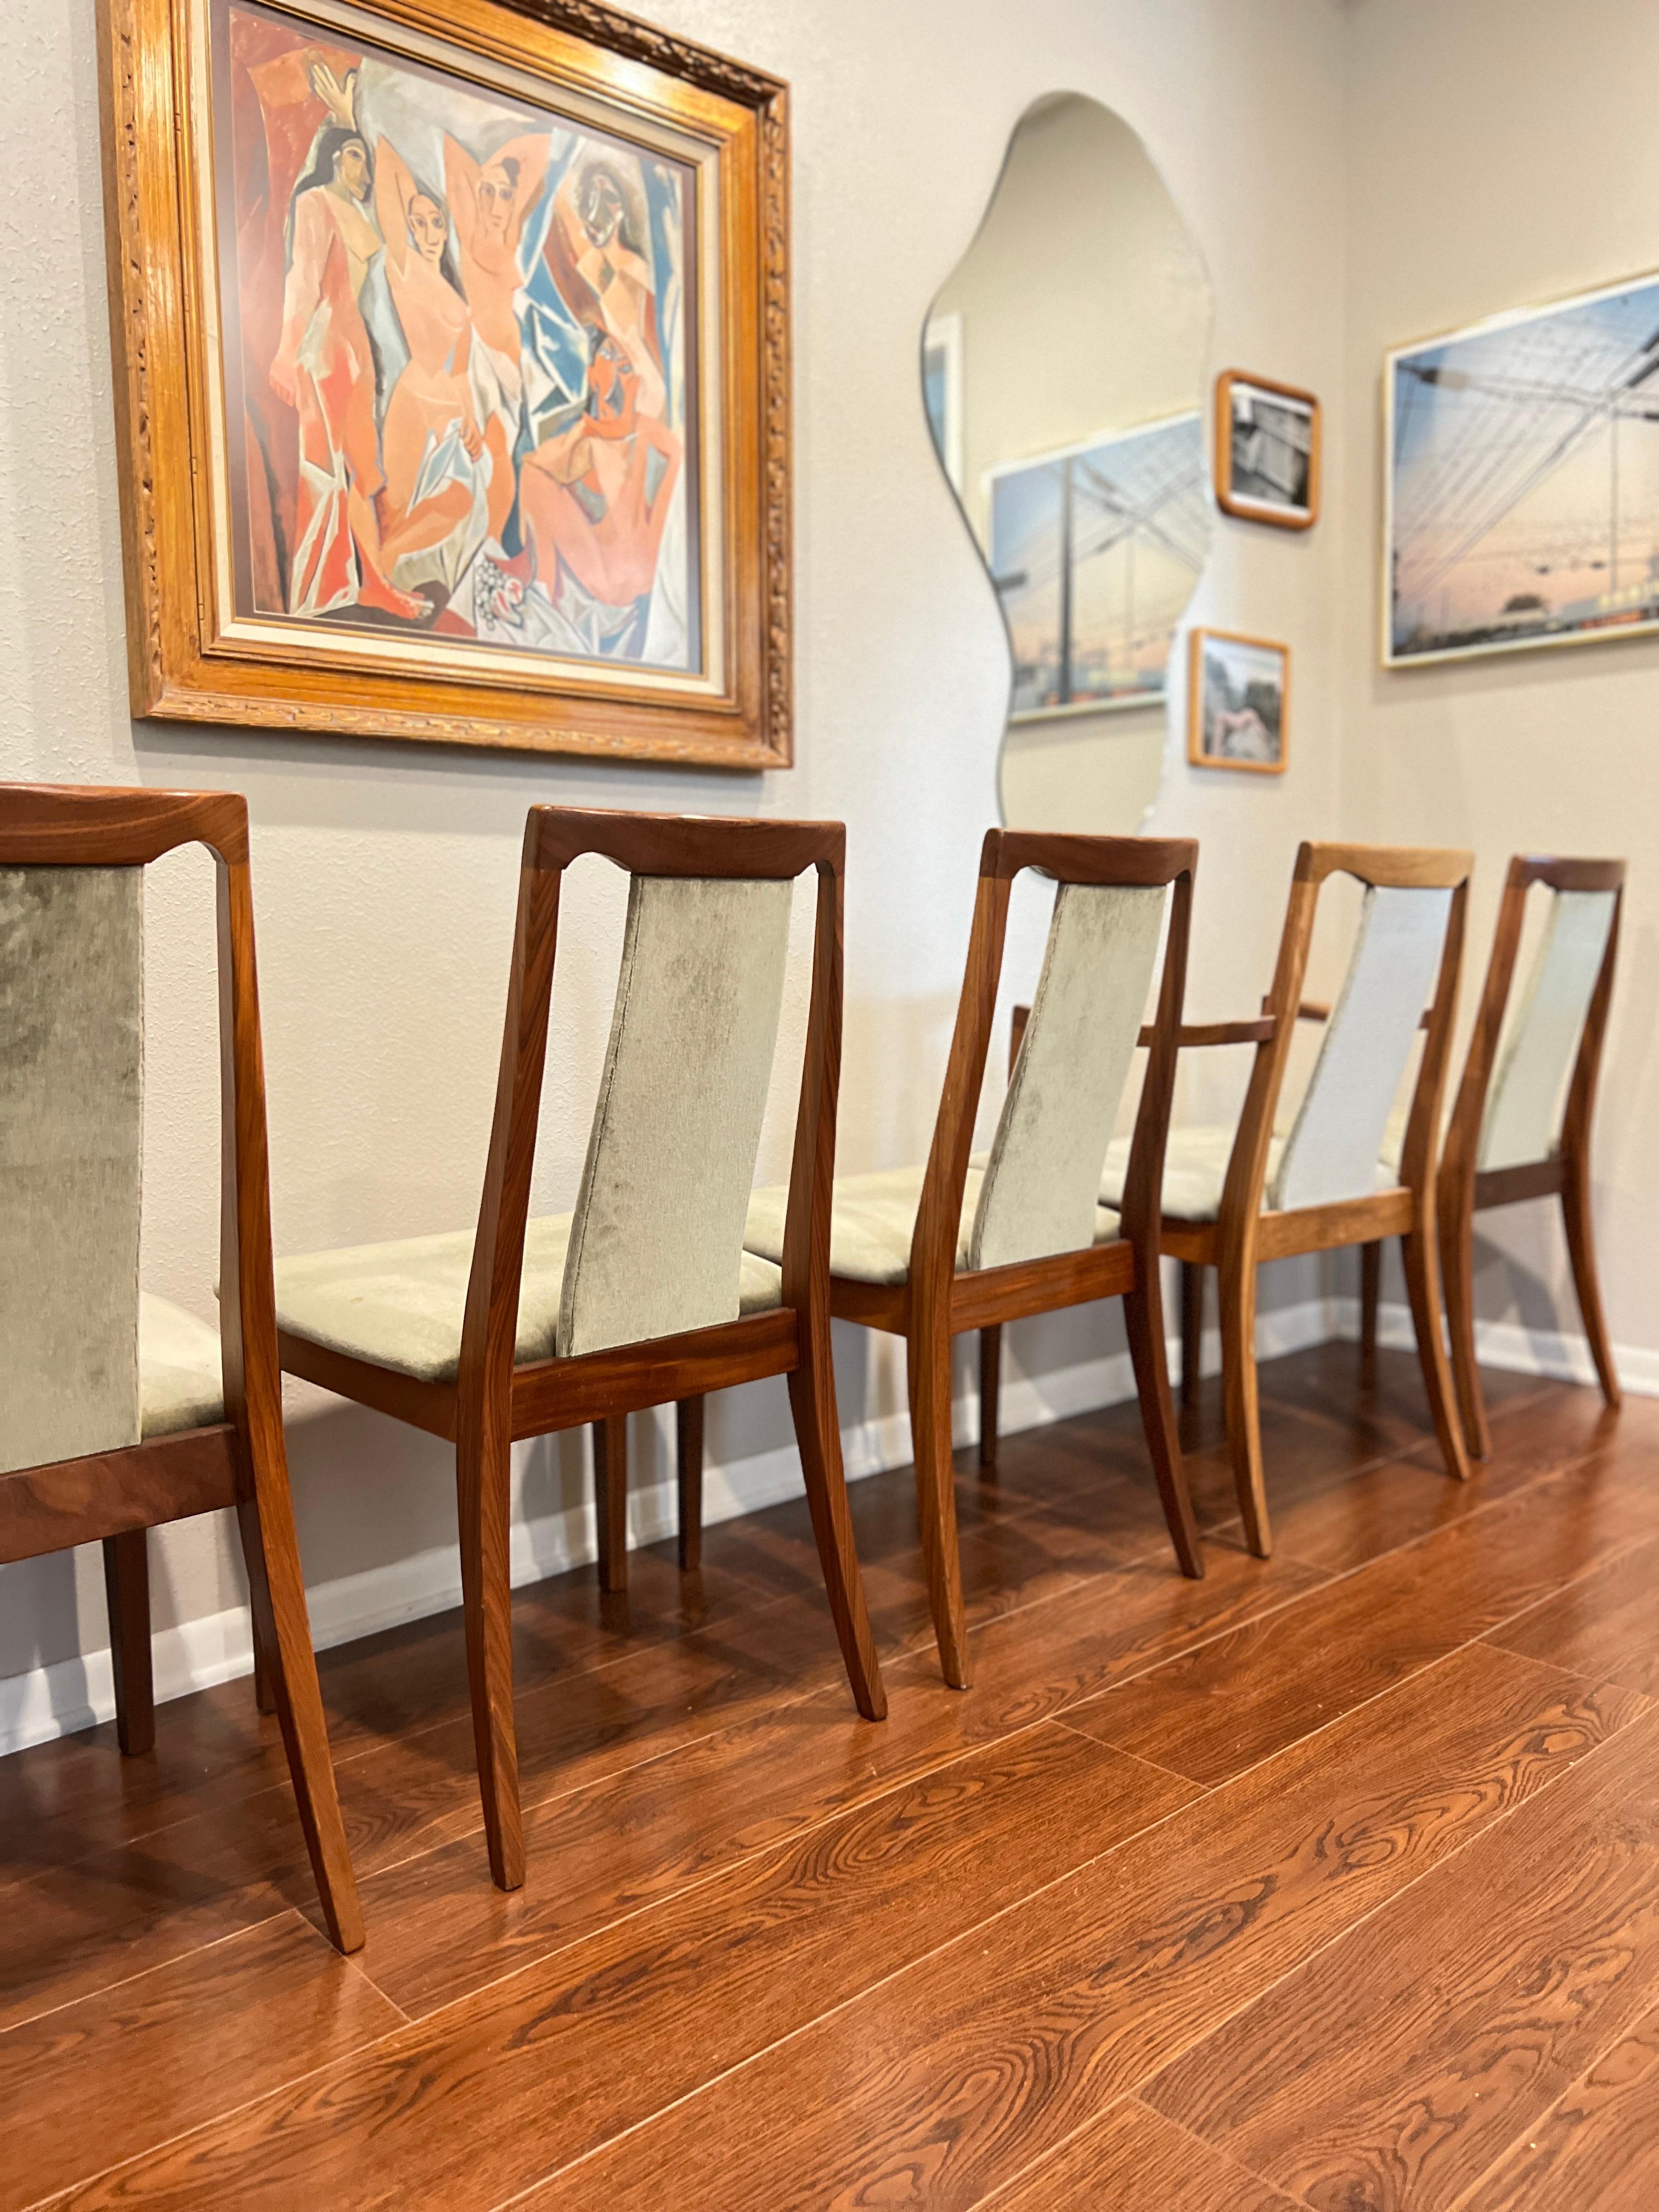 A set of 6 mid century modern style dining chairs by G plan, circa 1980s. Includes 2 captains chairs and 4 armless chairs. The green velvet is original and in surprisingly good condition. Tags still intact on the bottom. Chairs are structurally